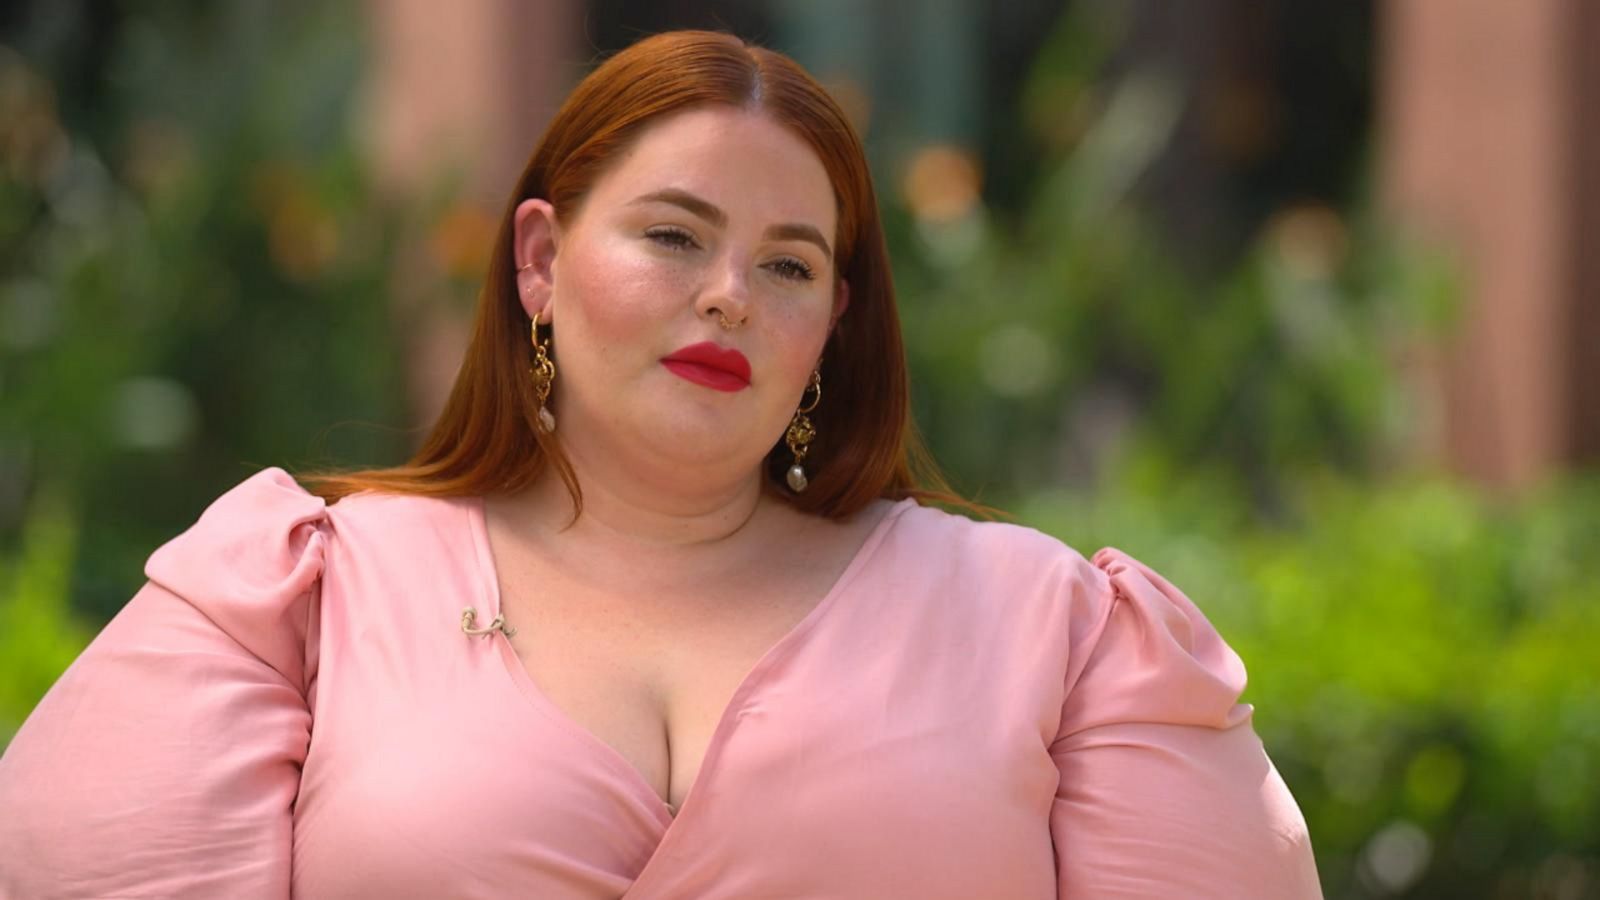 Tess Holliday Shares Why She's Not Posting Her Workouts On Social Media